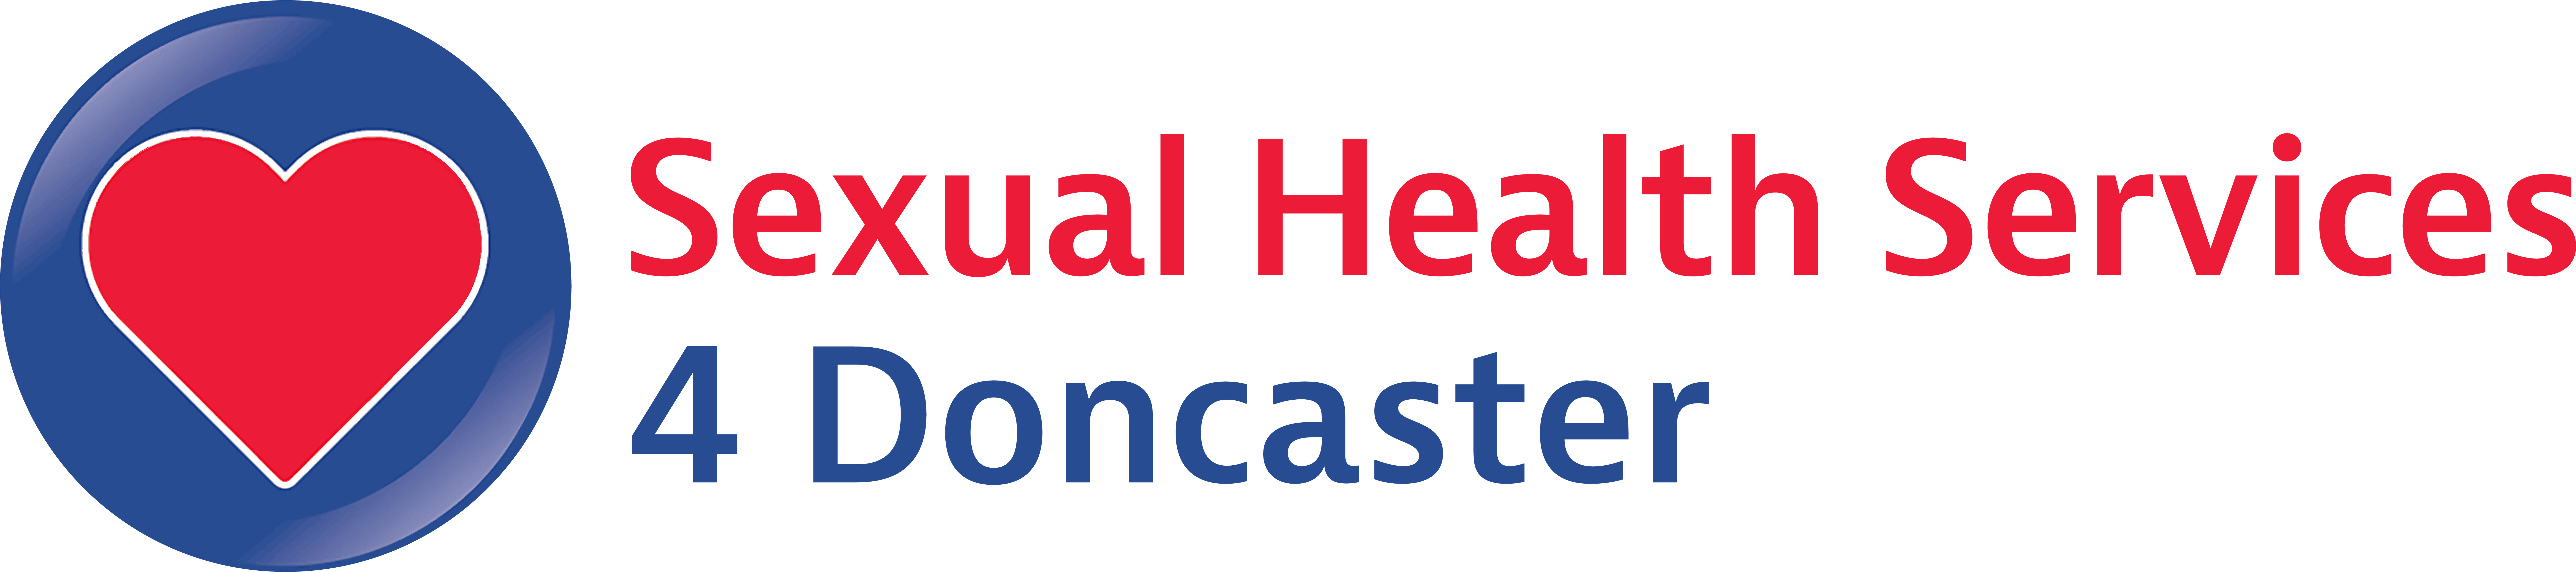 Sexual Health Services 4 Doncaster